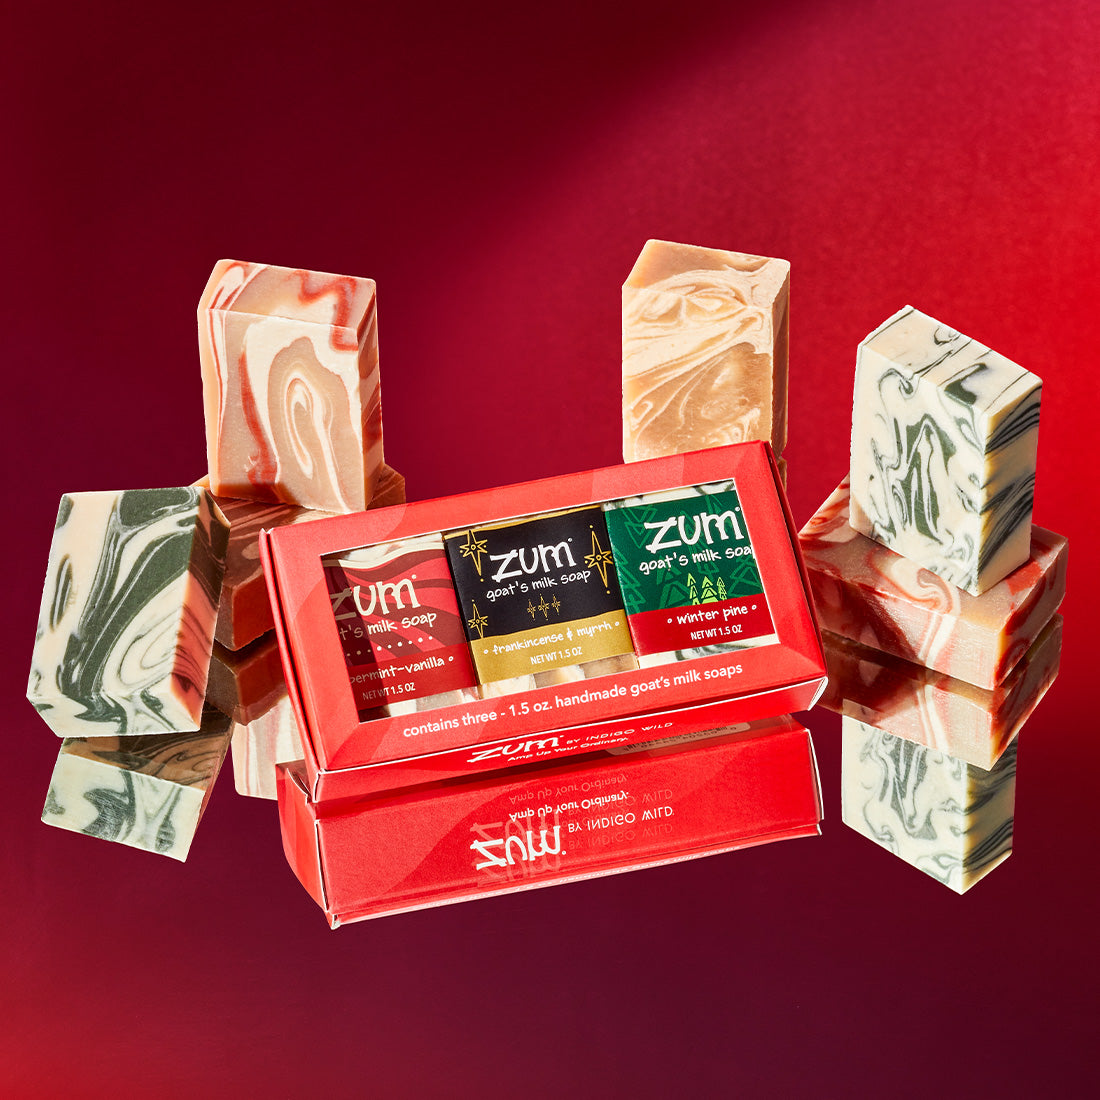 Fold in red box with rectangular cut out in front that hold Peppermint-Vanilla, Frankincense & Myrrh, and Winter Pine mini bar soaps. Other unlabeled bar soaps with swirls of the same scents as the ones in the box are stacked and surrounding the box on a mirrored surface. Red gradient background.